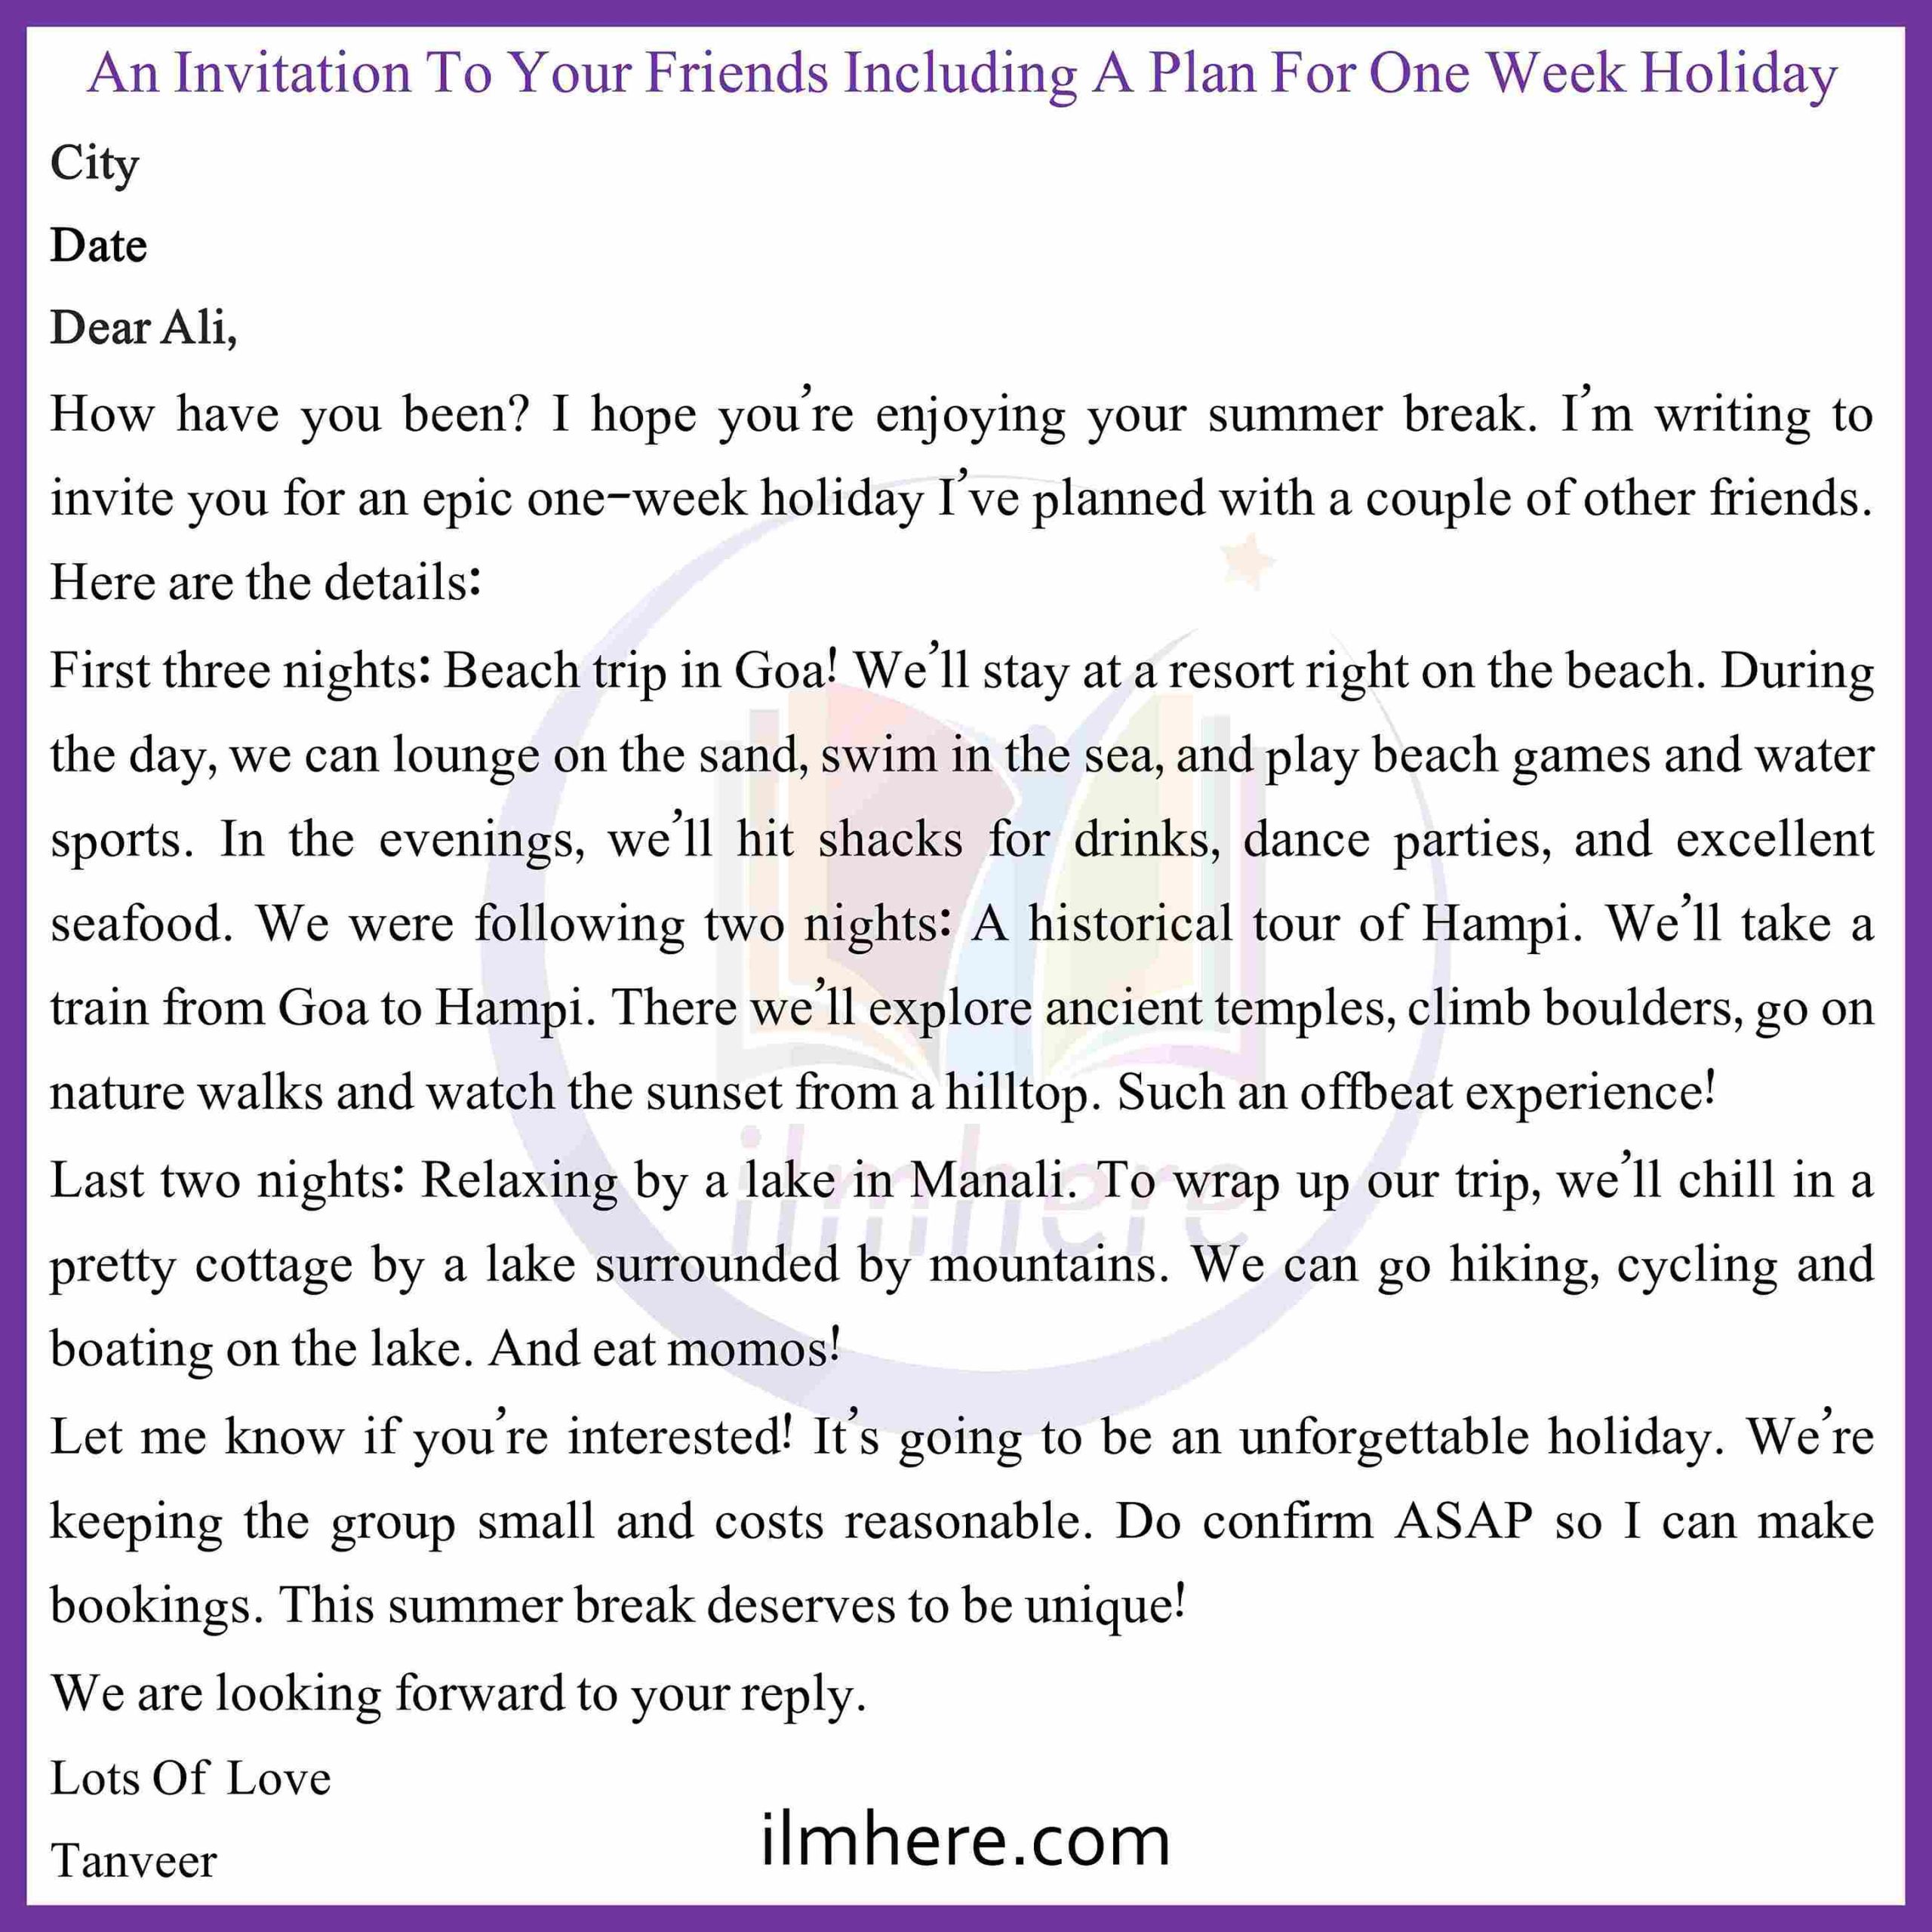 How to Write An Invitation To Your Friends Including A Plan For One Week Holiday